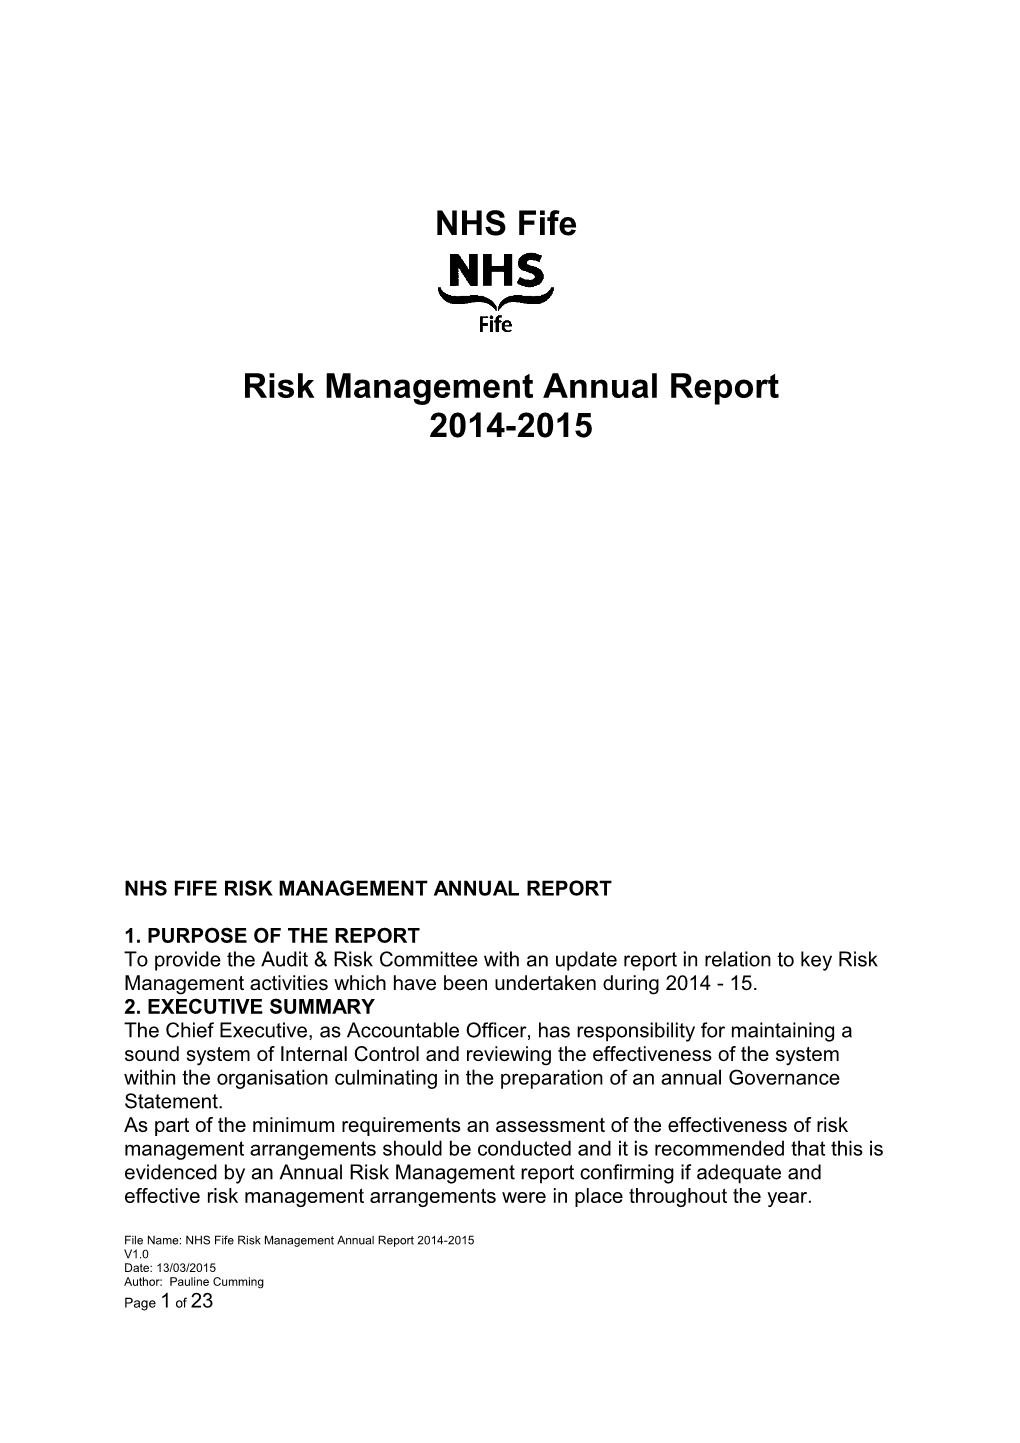 Risk Management Annual Report